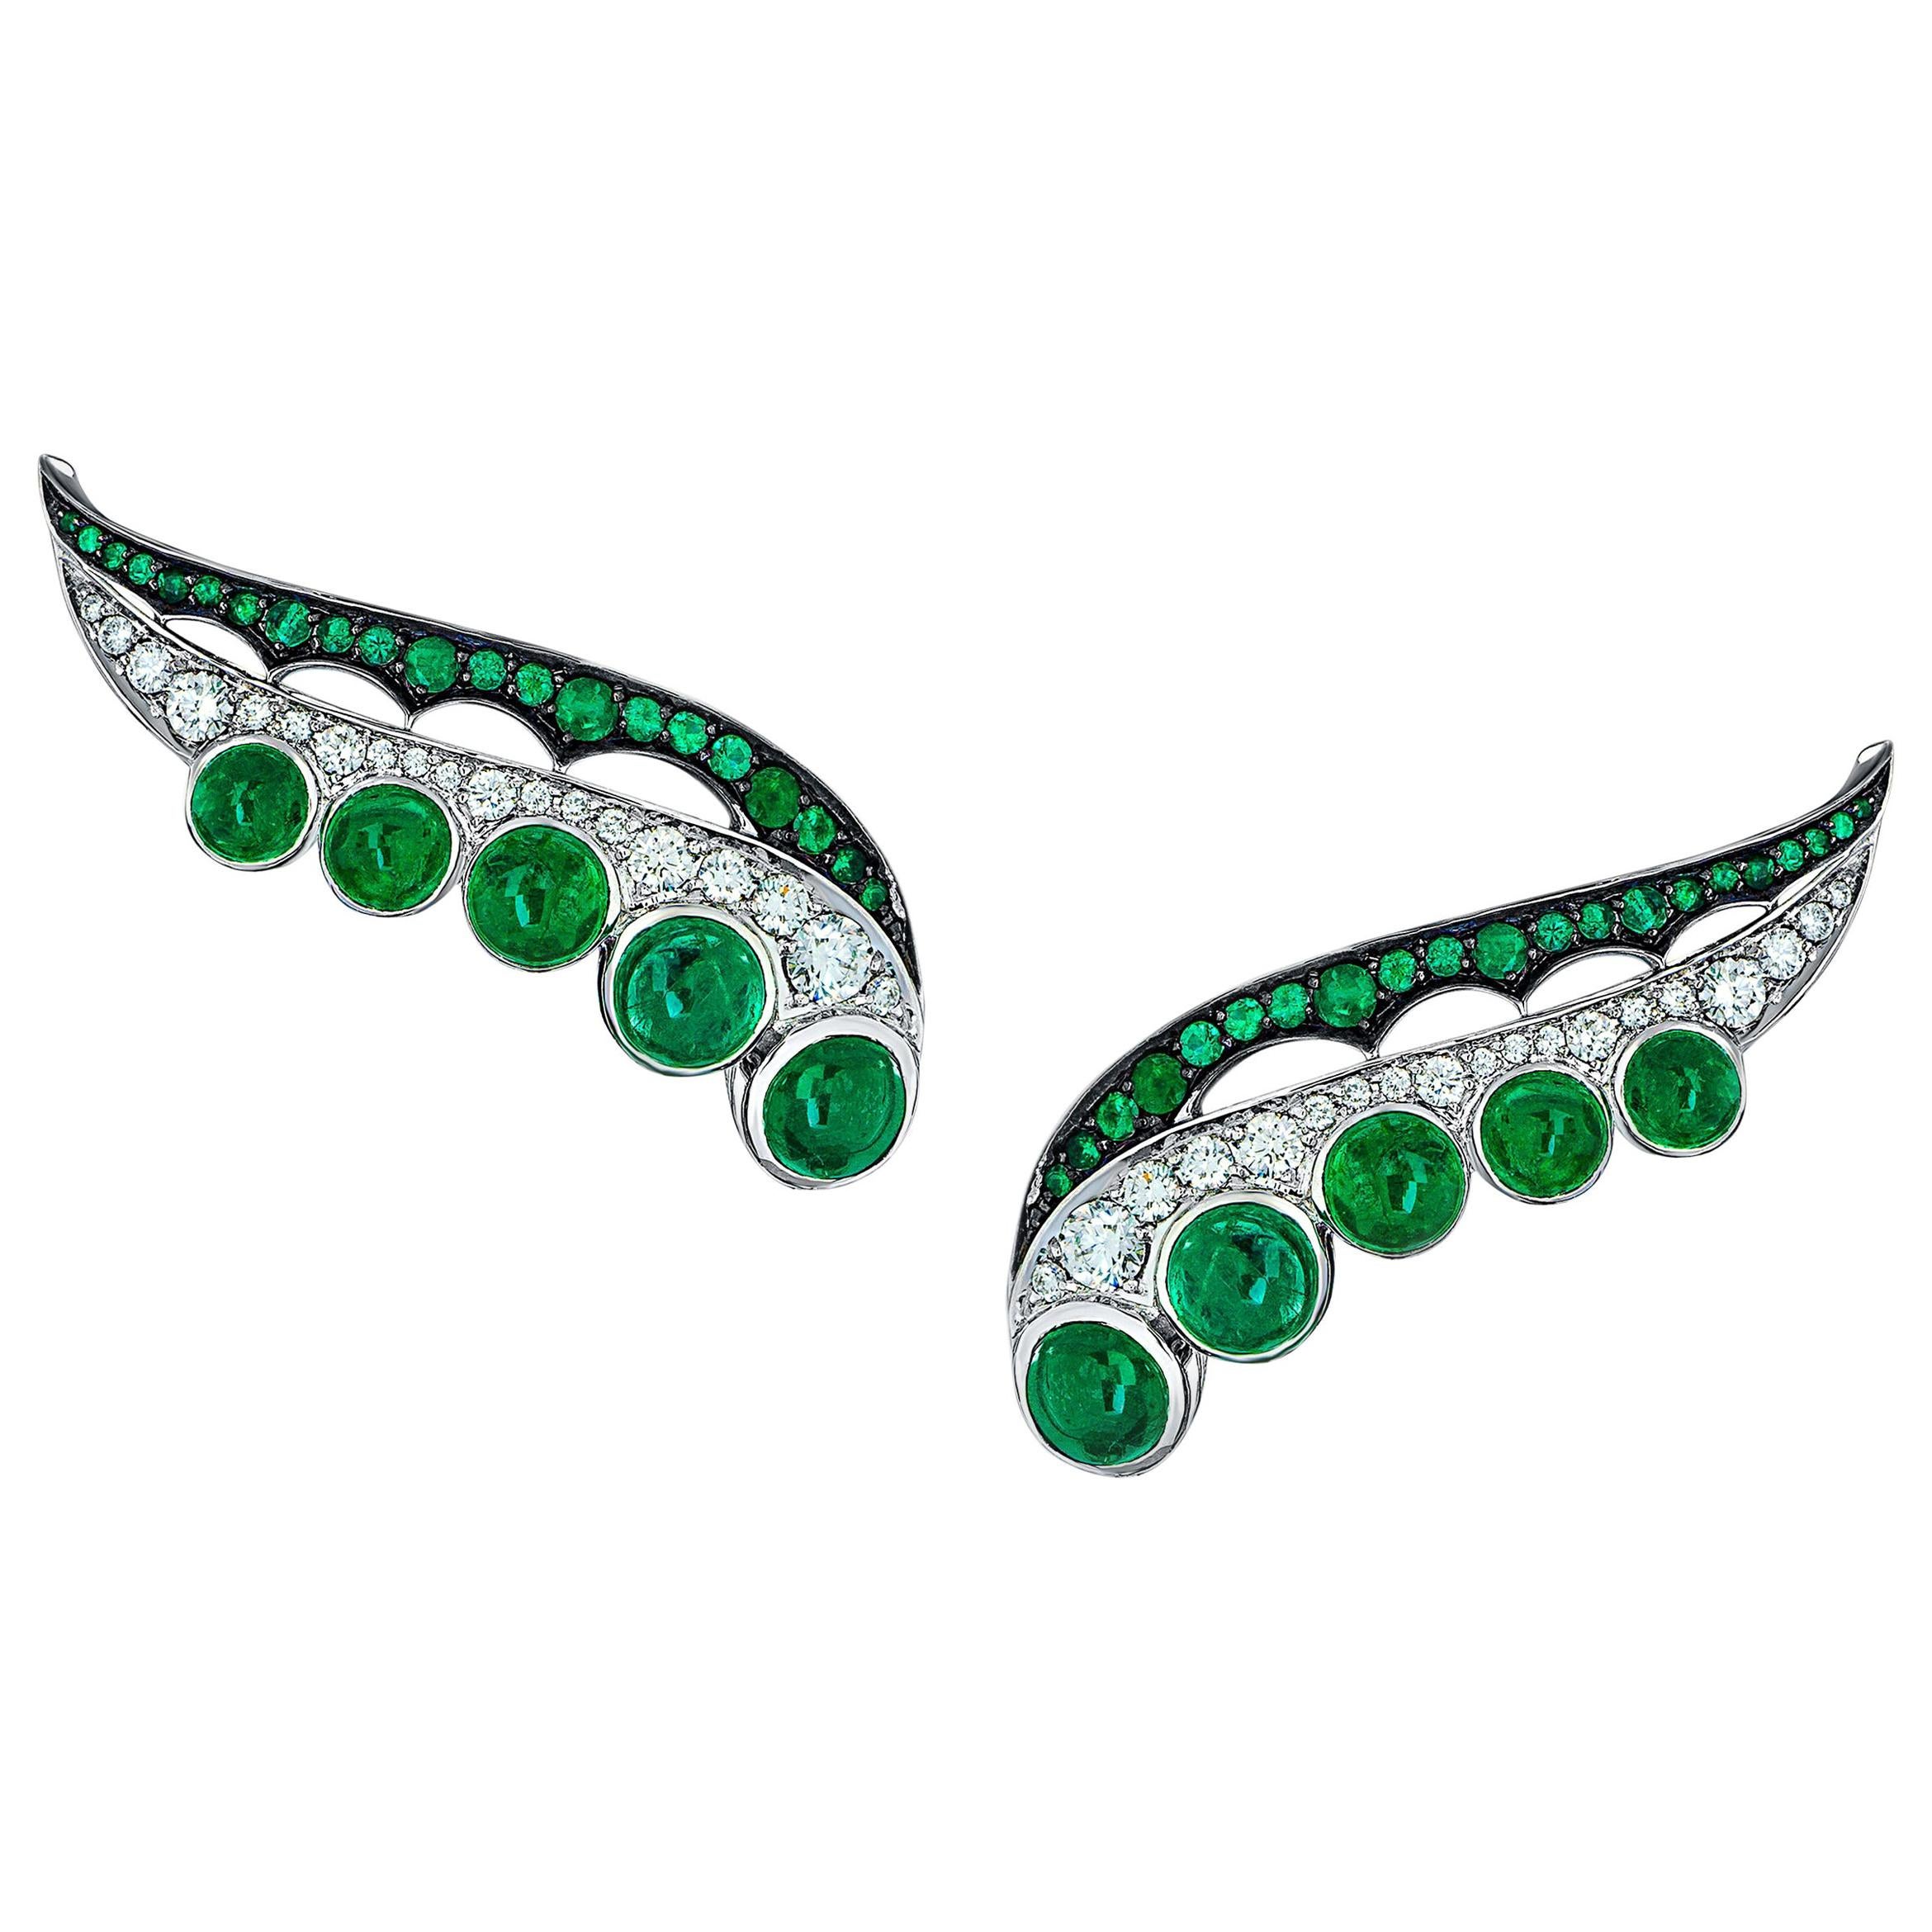 18 Karat White Gold, White Diamonds and Ethically Sourced Emeralds Earrings